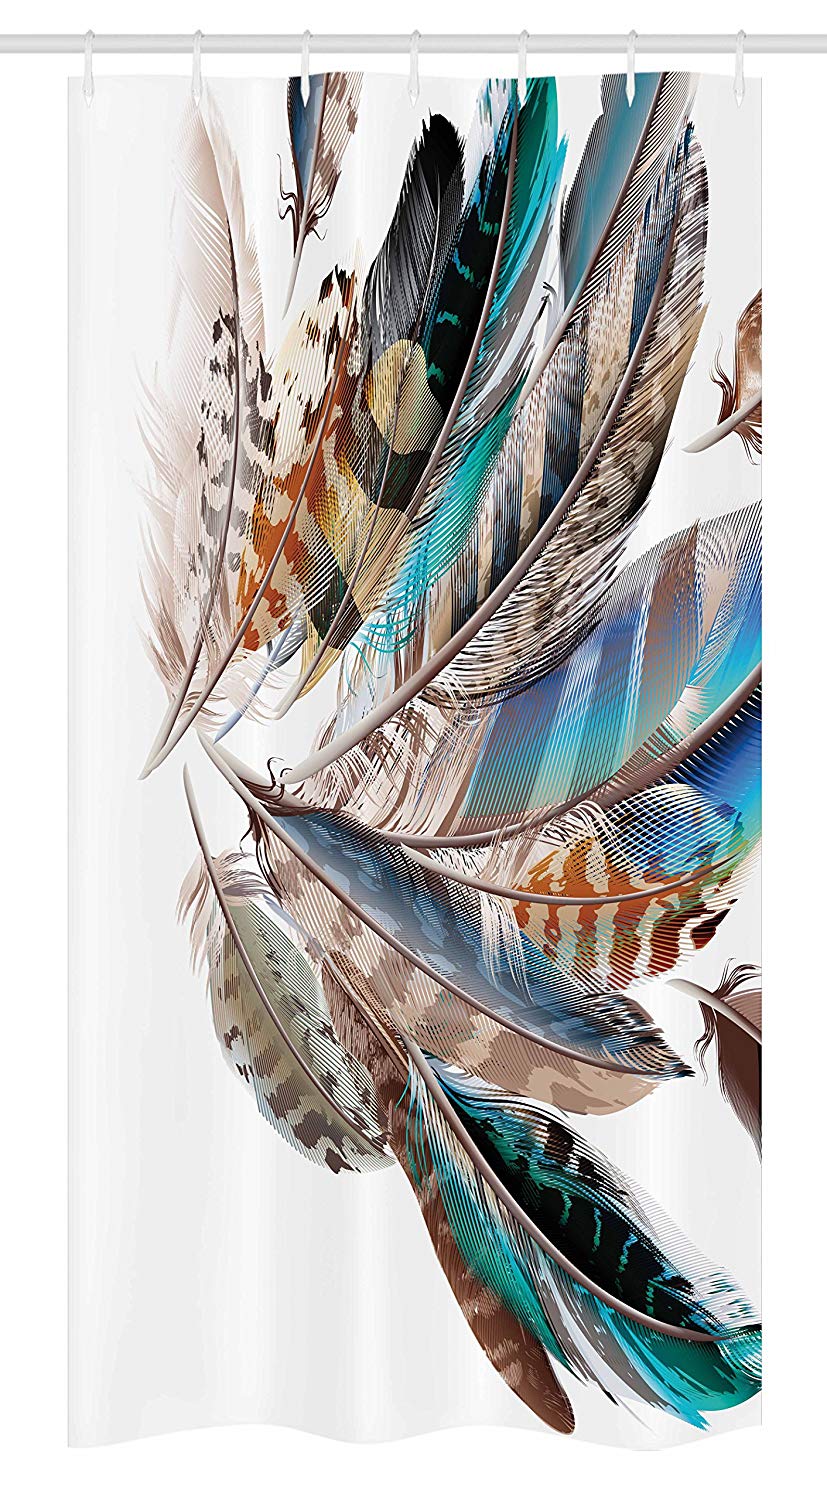 Ambesonne Feathers Stall Shower Curtain, Vaned Types and Natal Contour Flight Bird Feathers and Animal Skin Element Print, Fabric Bathroom Decor Set with Hooks, 36" X 72", Teal Brown